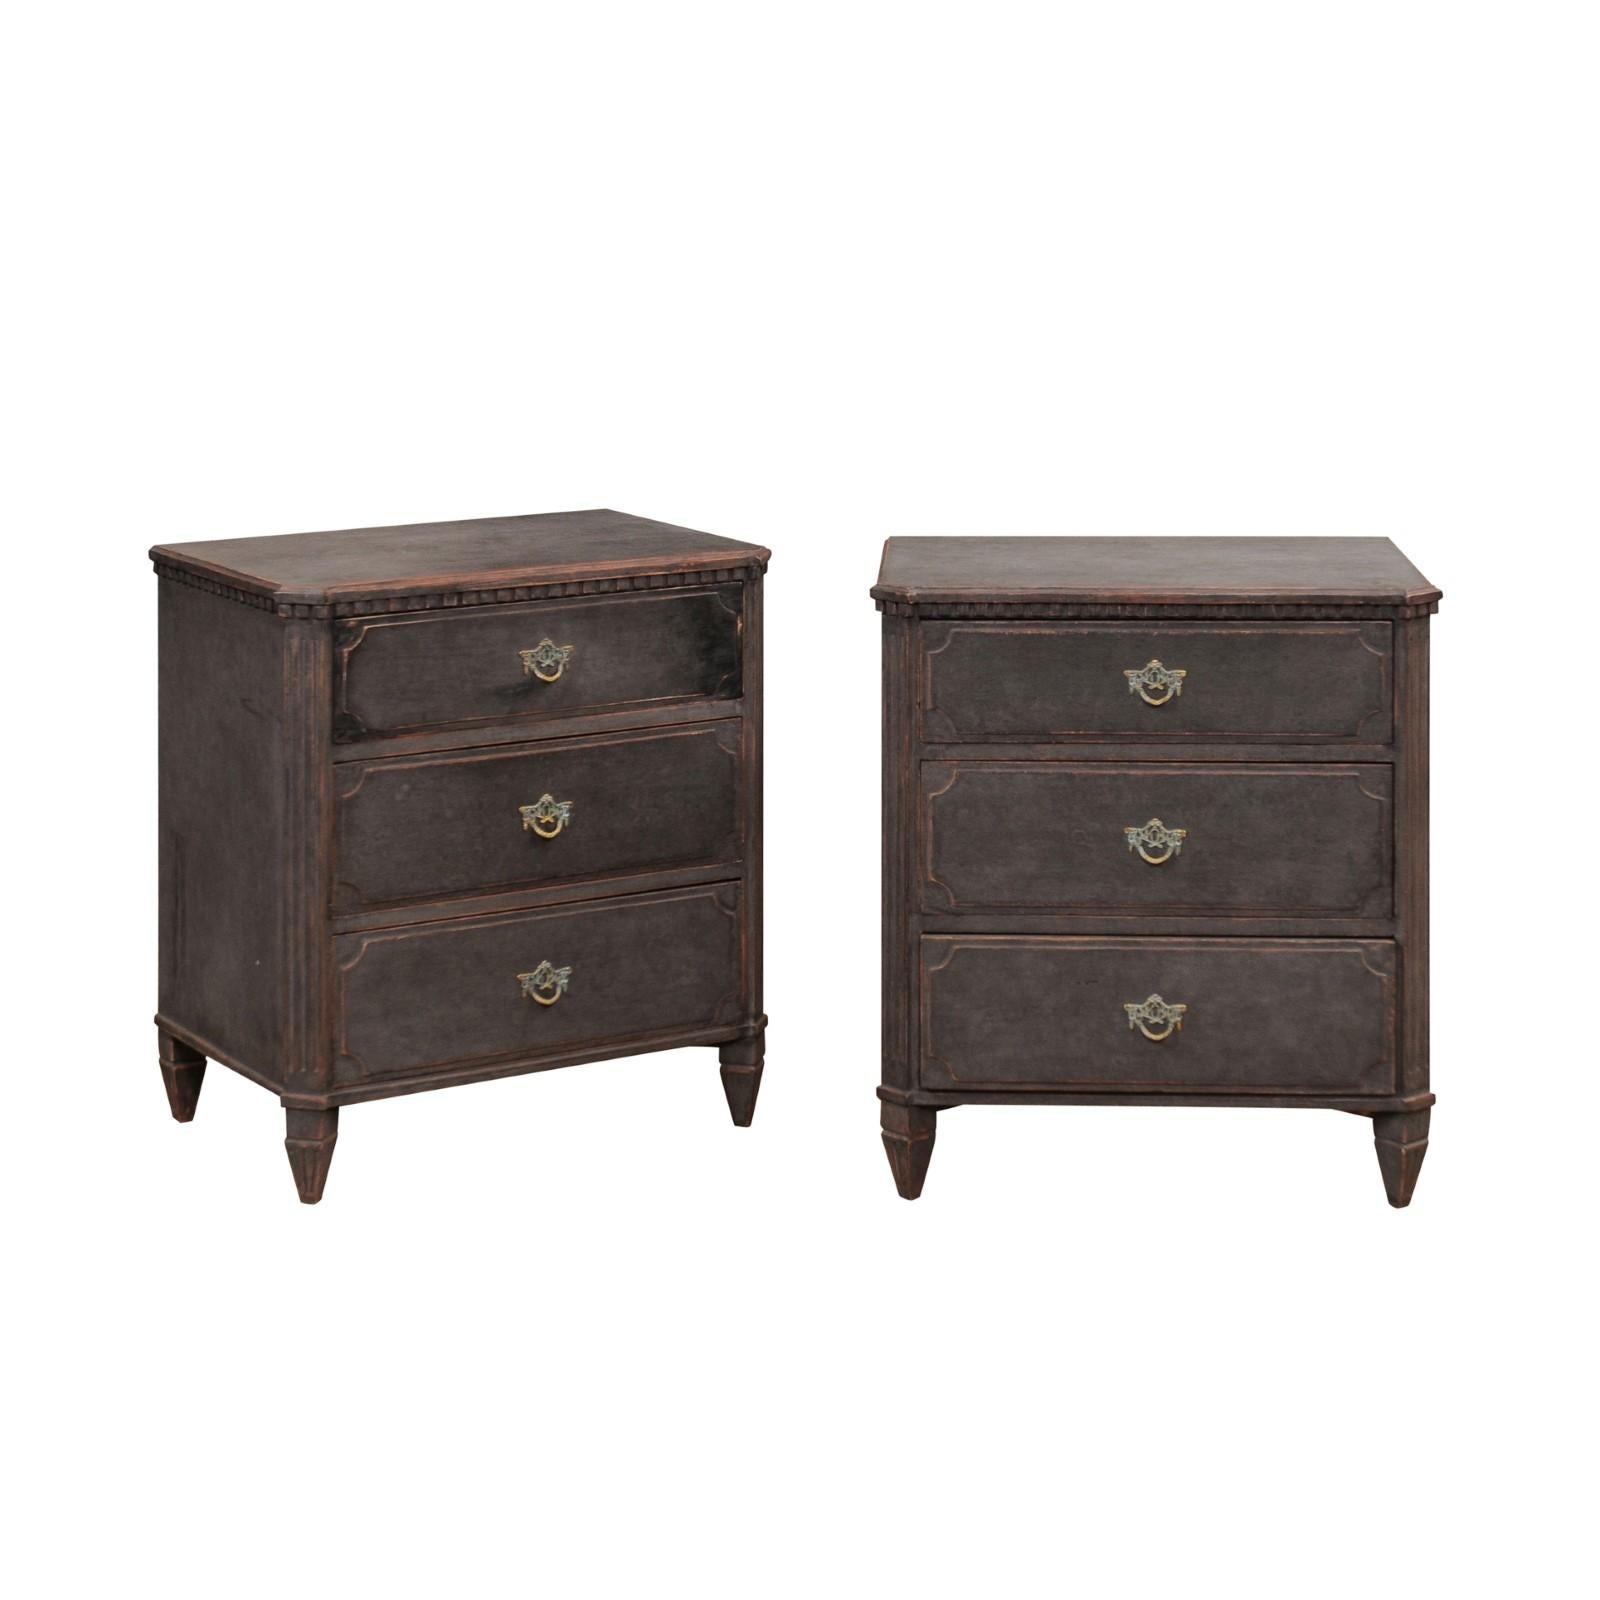 A pair of Swedish Gustavian style chests from the 19th century with antique charcoal / black painted finish, three drawers, carved dentil molding and canted side posts. This pair of Swedish Gustavian style chests from the 19th century exudes a